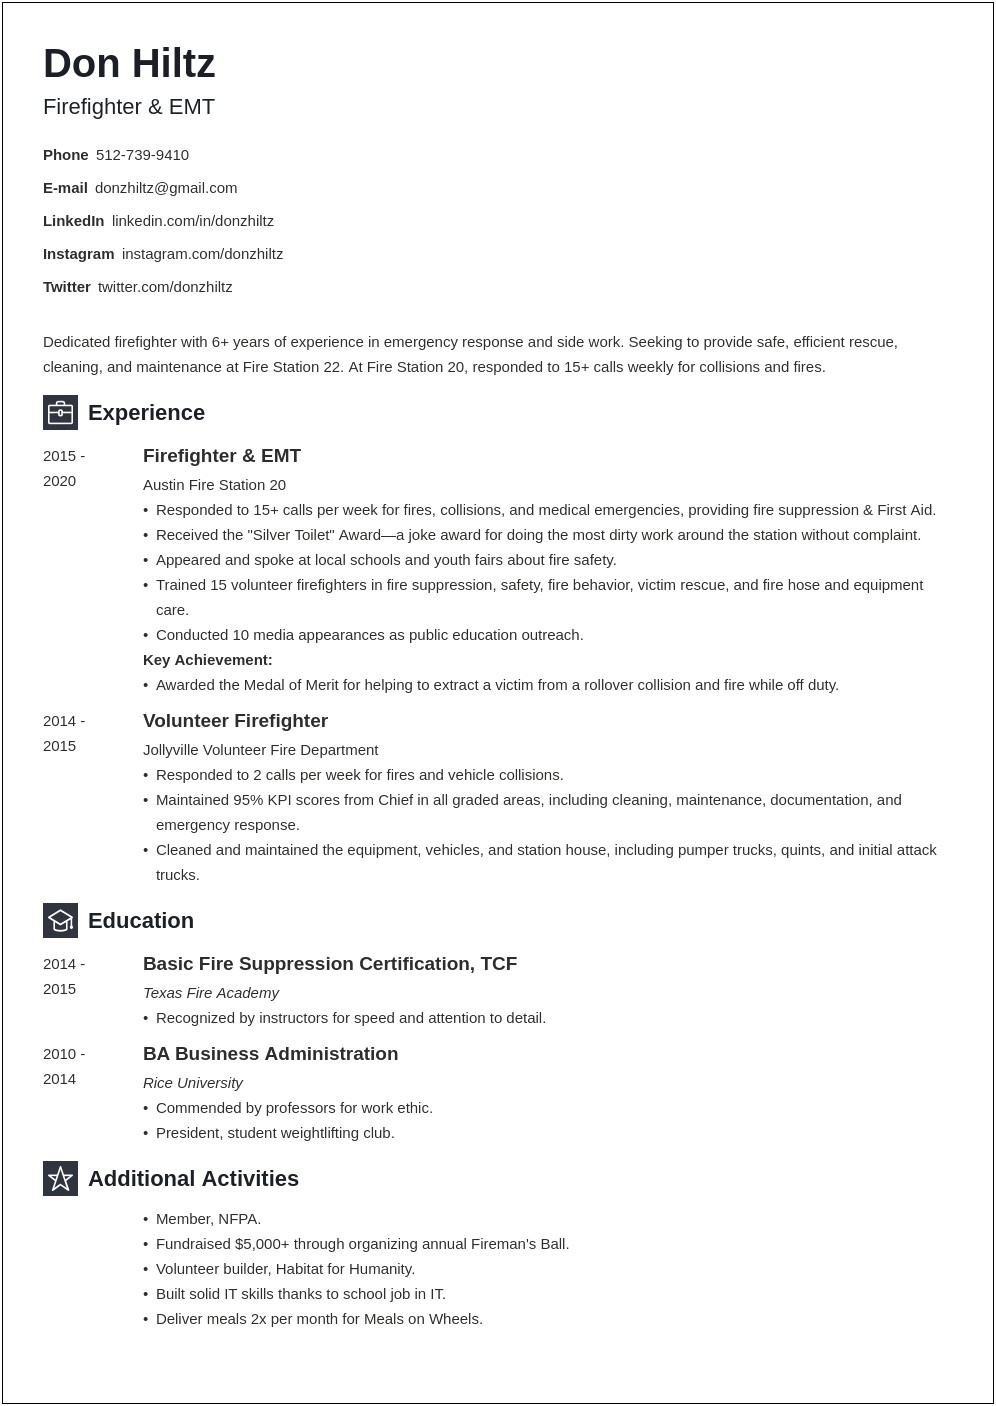 Resume Summary Letter For A Fire Fighter